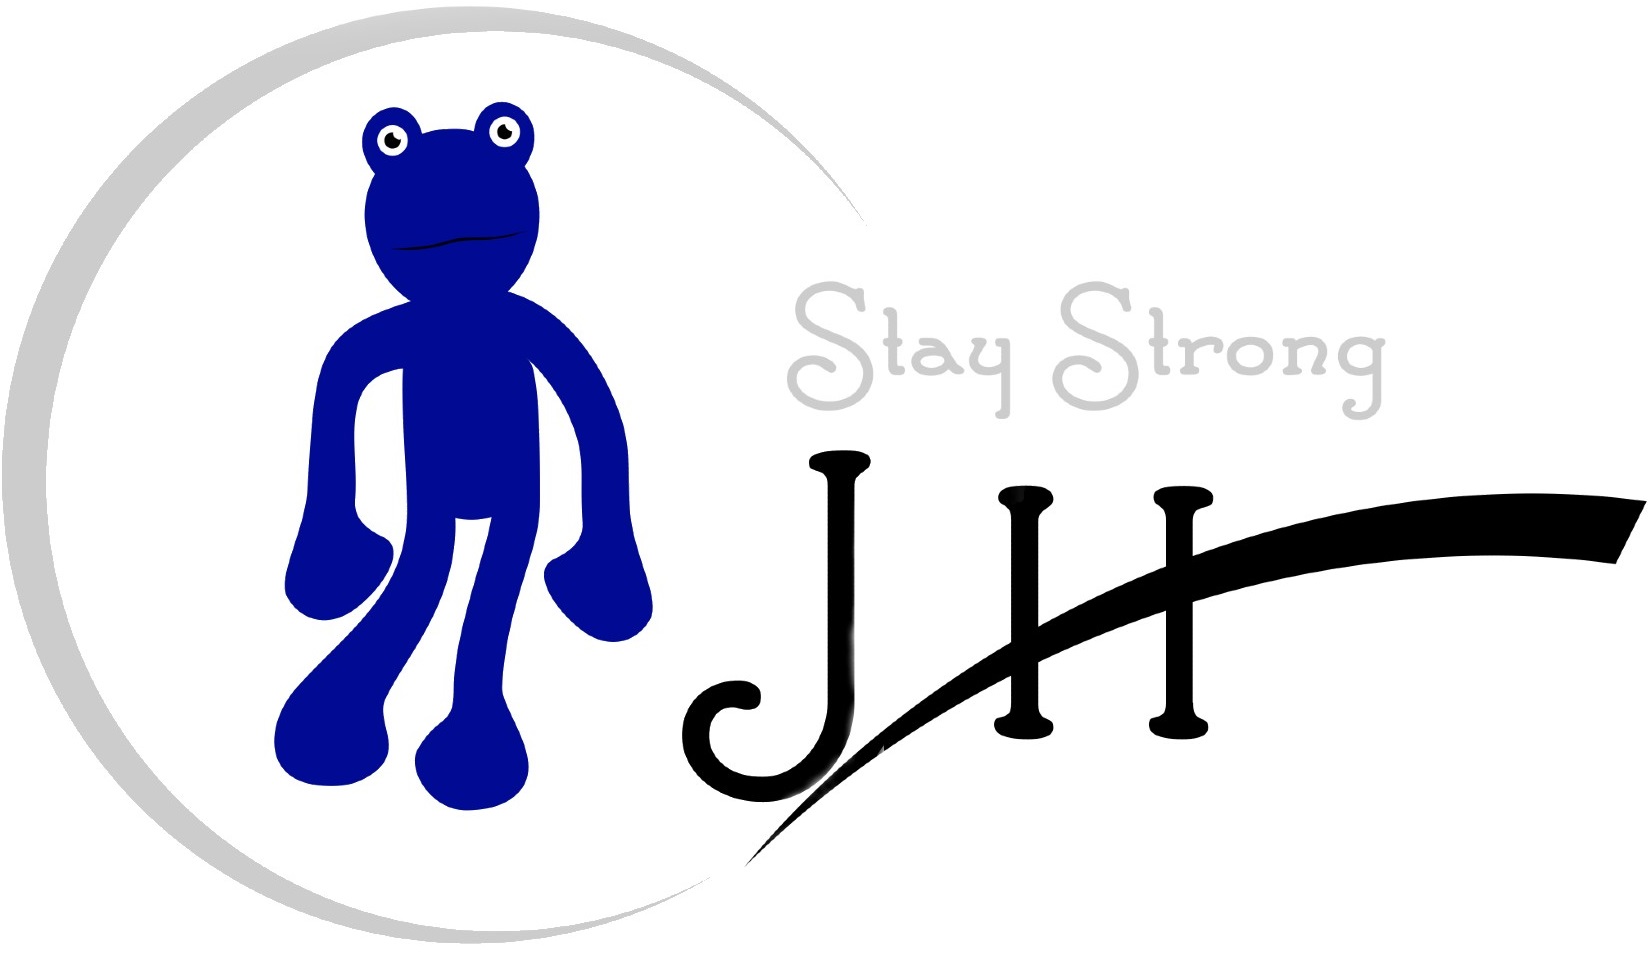 JH tight logo approved